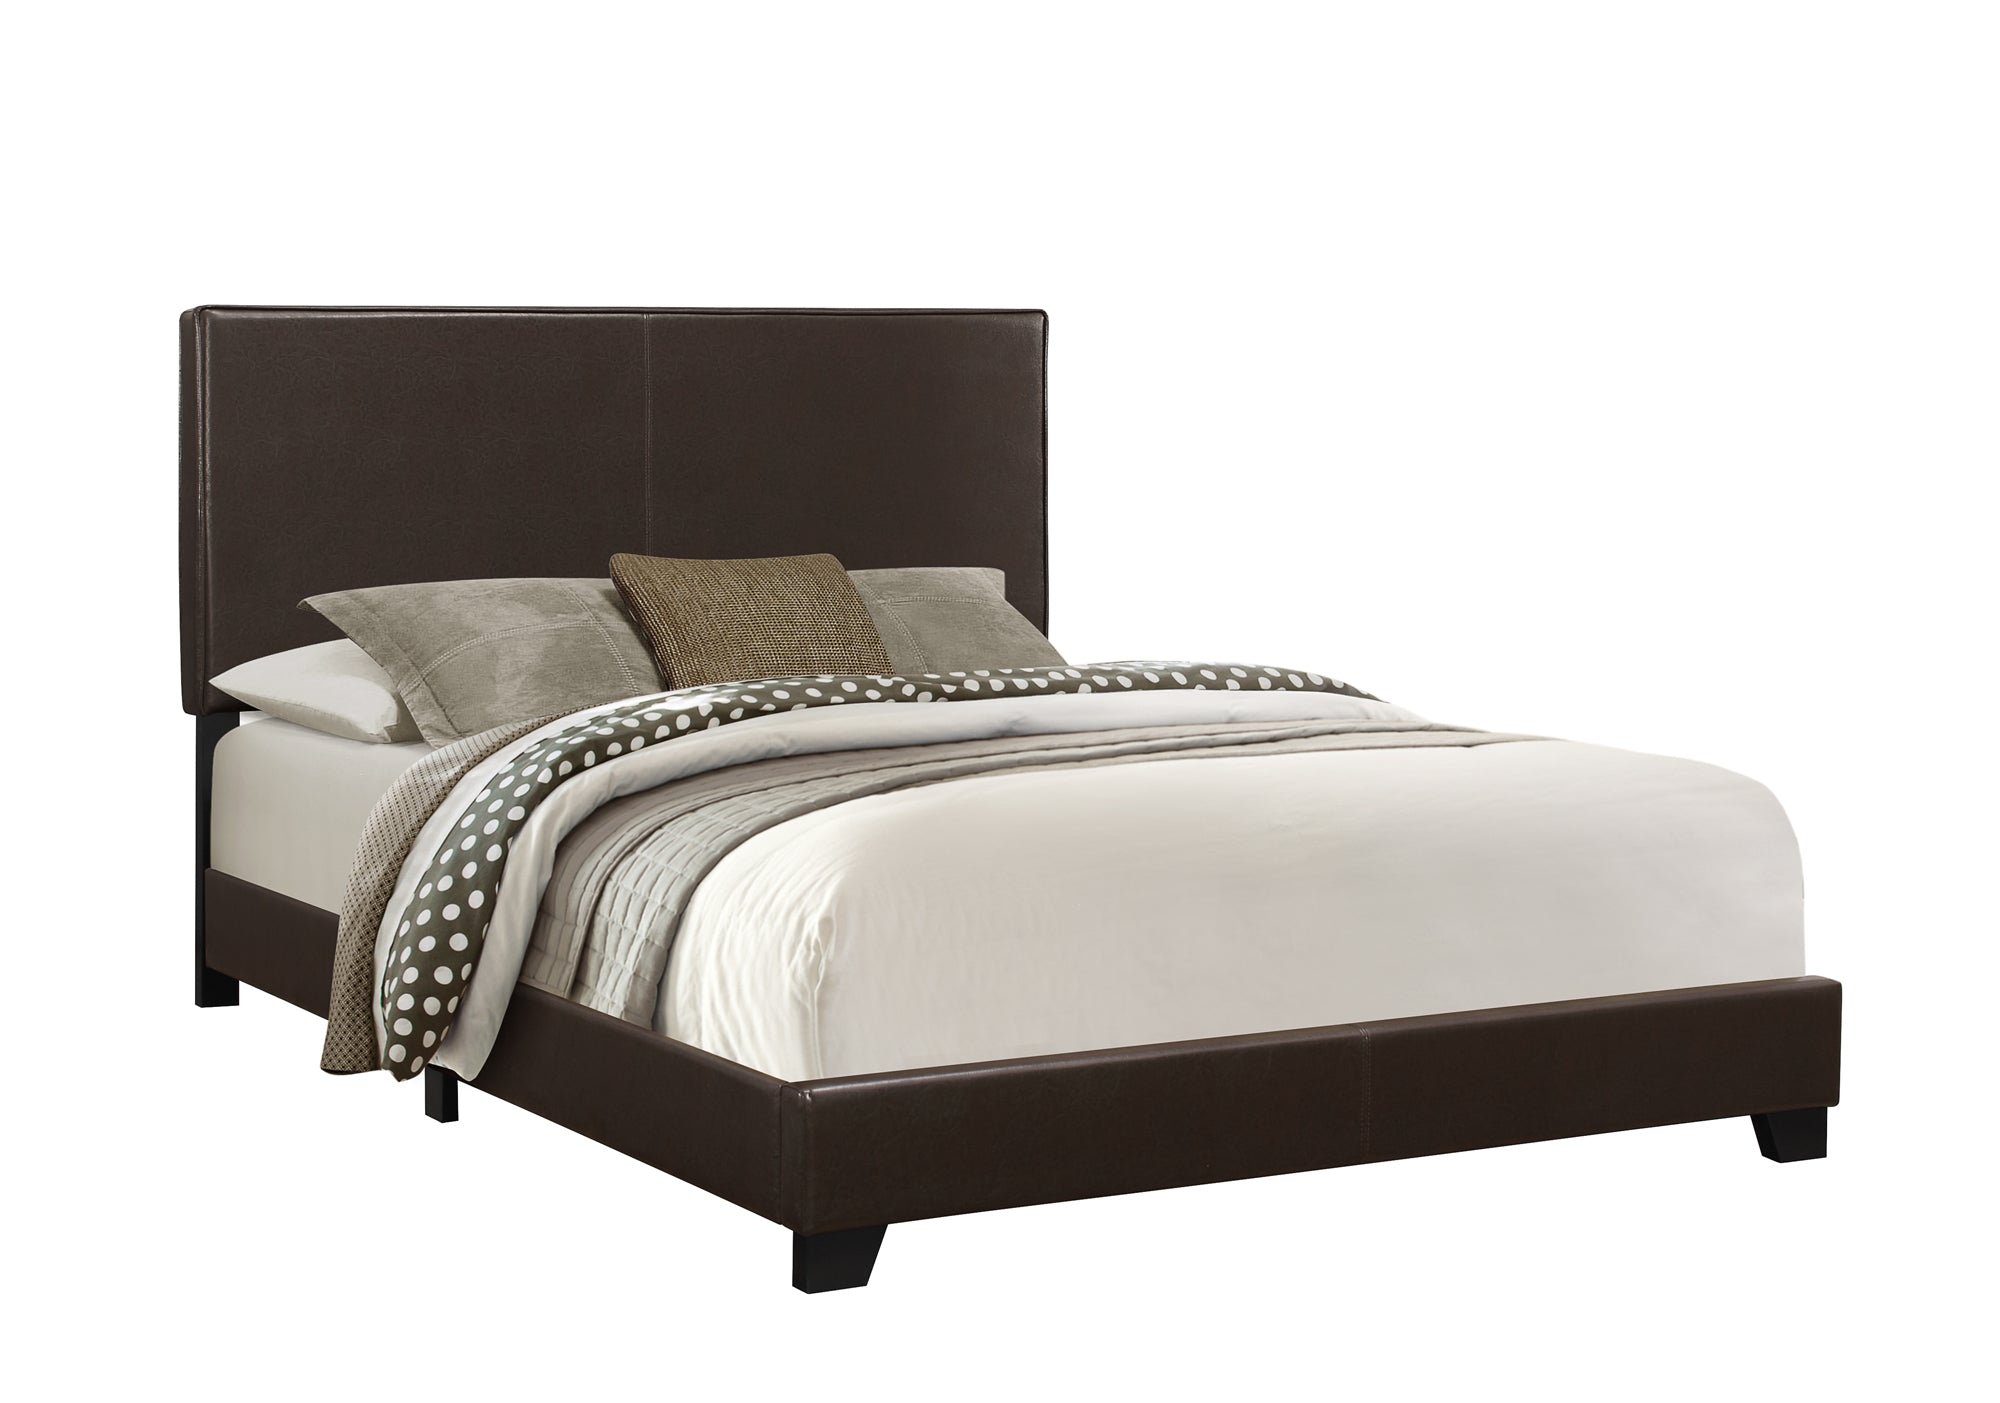 MN-875910Q    Bed, Frame, Platform, Bedroom, Queen Size, Upholstered, Leather Look, Wood Legs, Dark Brown, Black, Contemporary, Modern